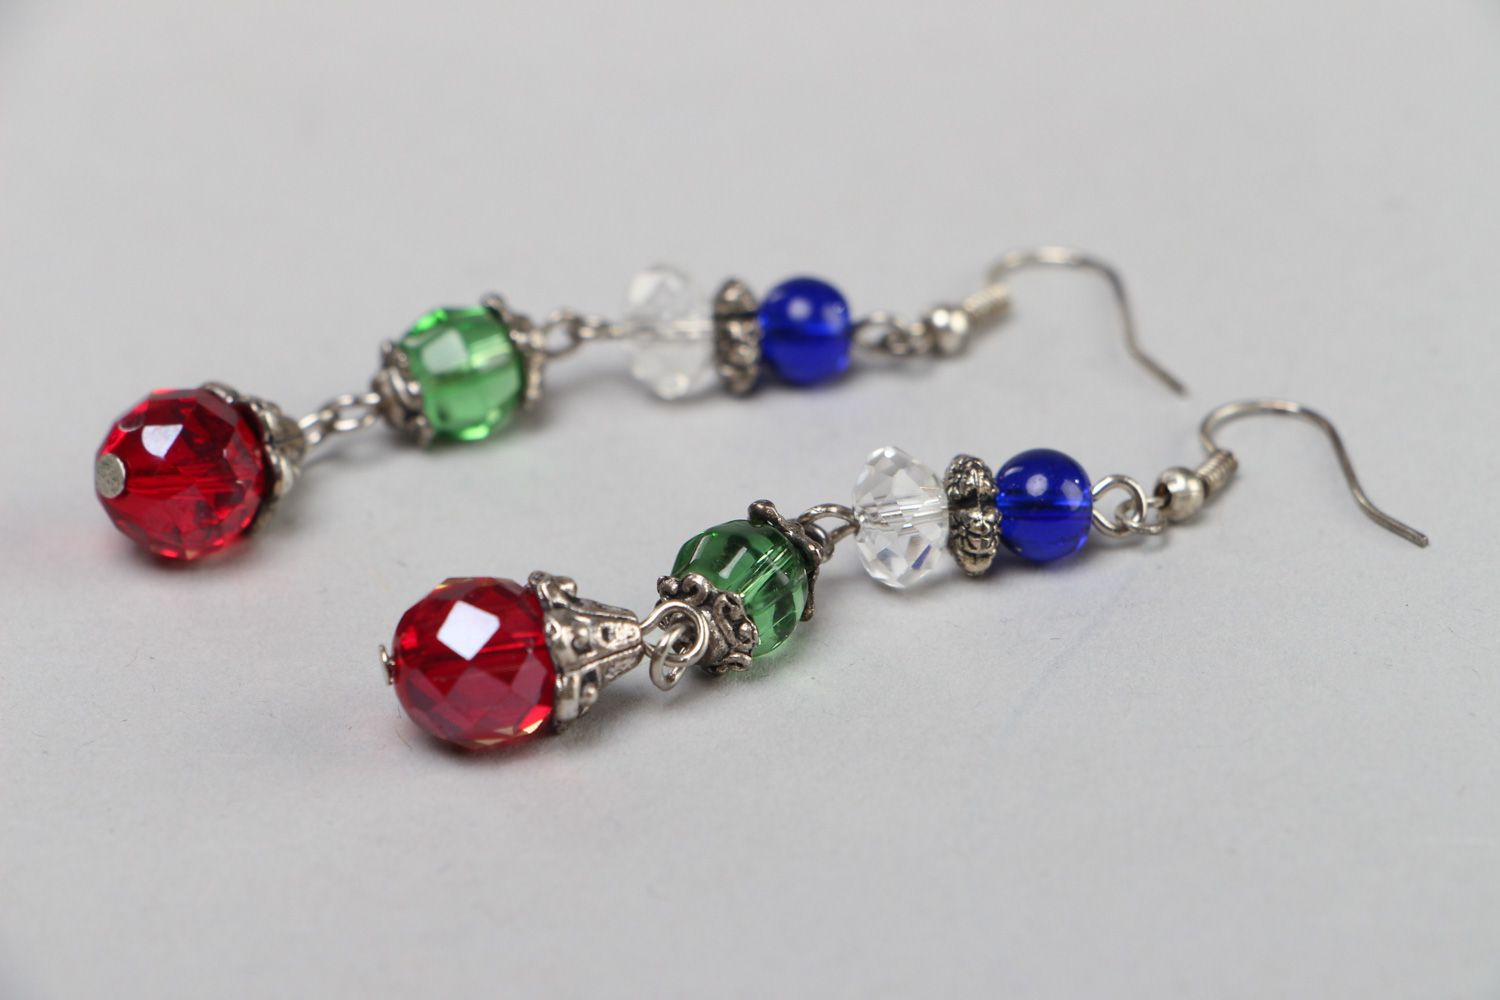 Handmade colorful long earrings with glass beads and metal fittings for ladies photo 2